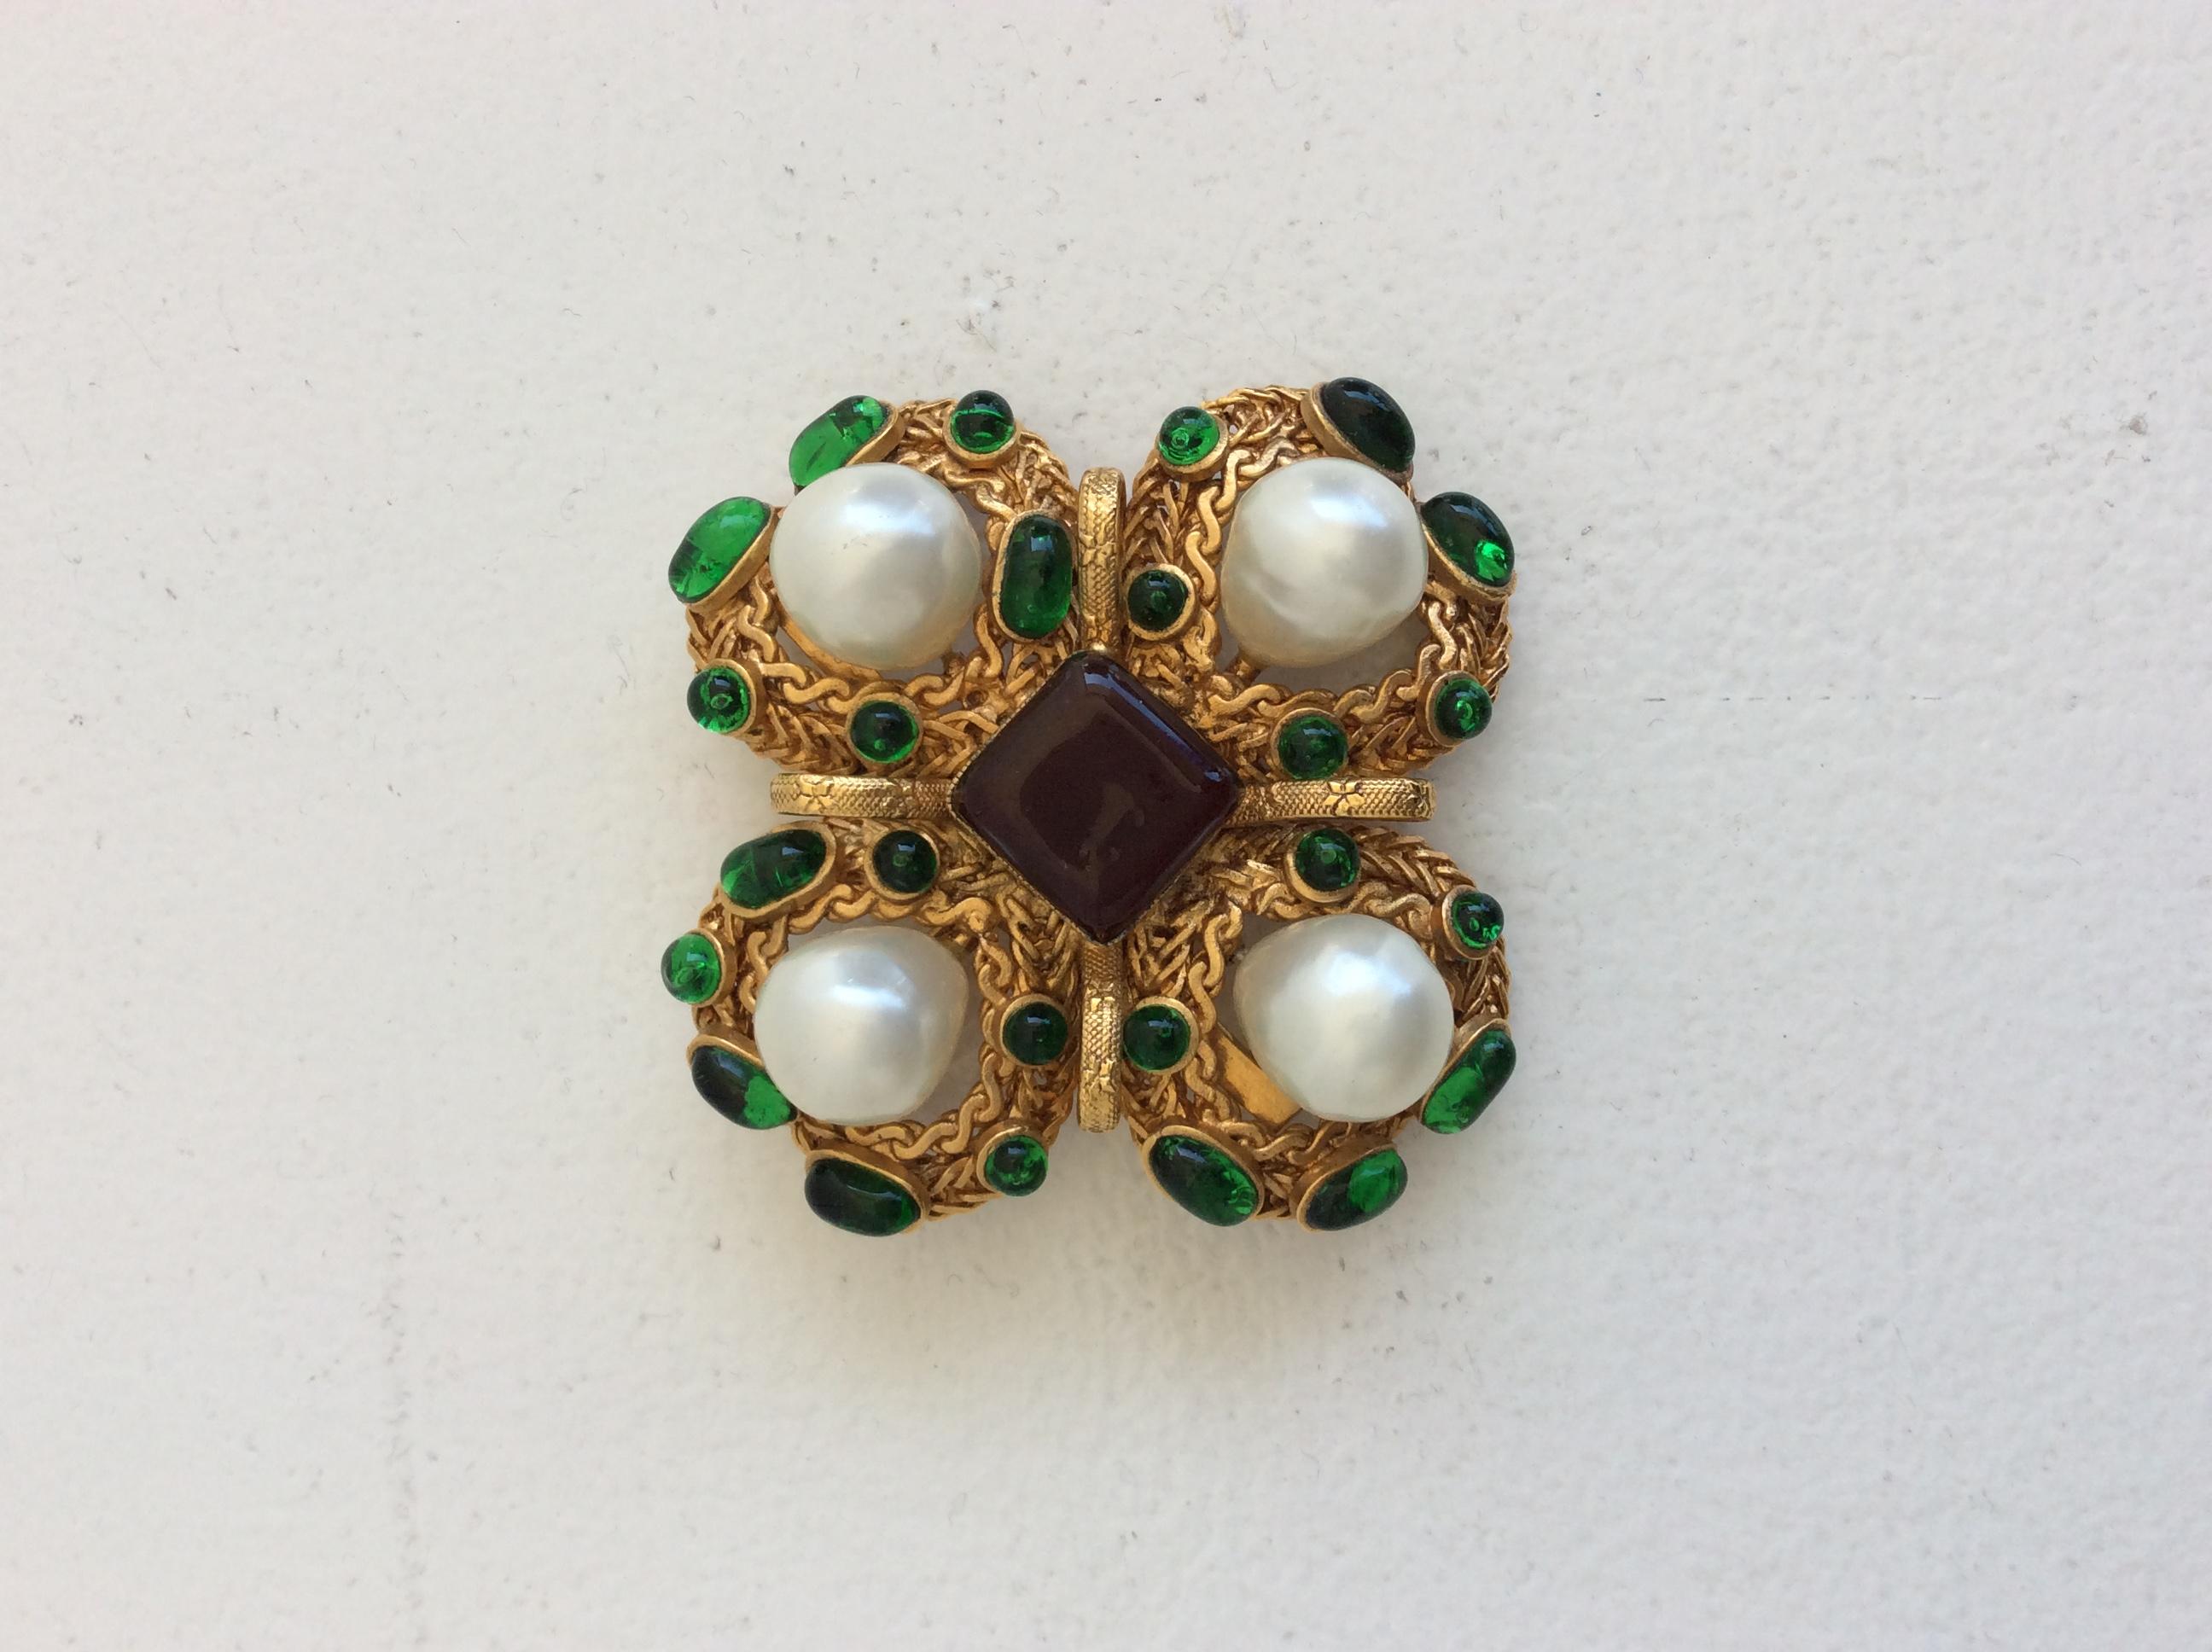 Chanel Vintage Gripoix Brooch. Textured, gold-tone, featuring 4 faux pearls and glass embellishments along with pin closure. Hook featured on the back to transform brooch into a necklace (see photo attached). 